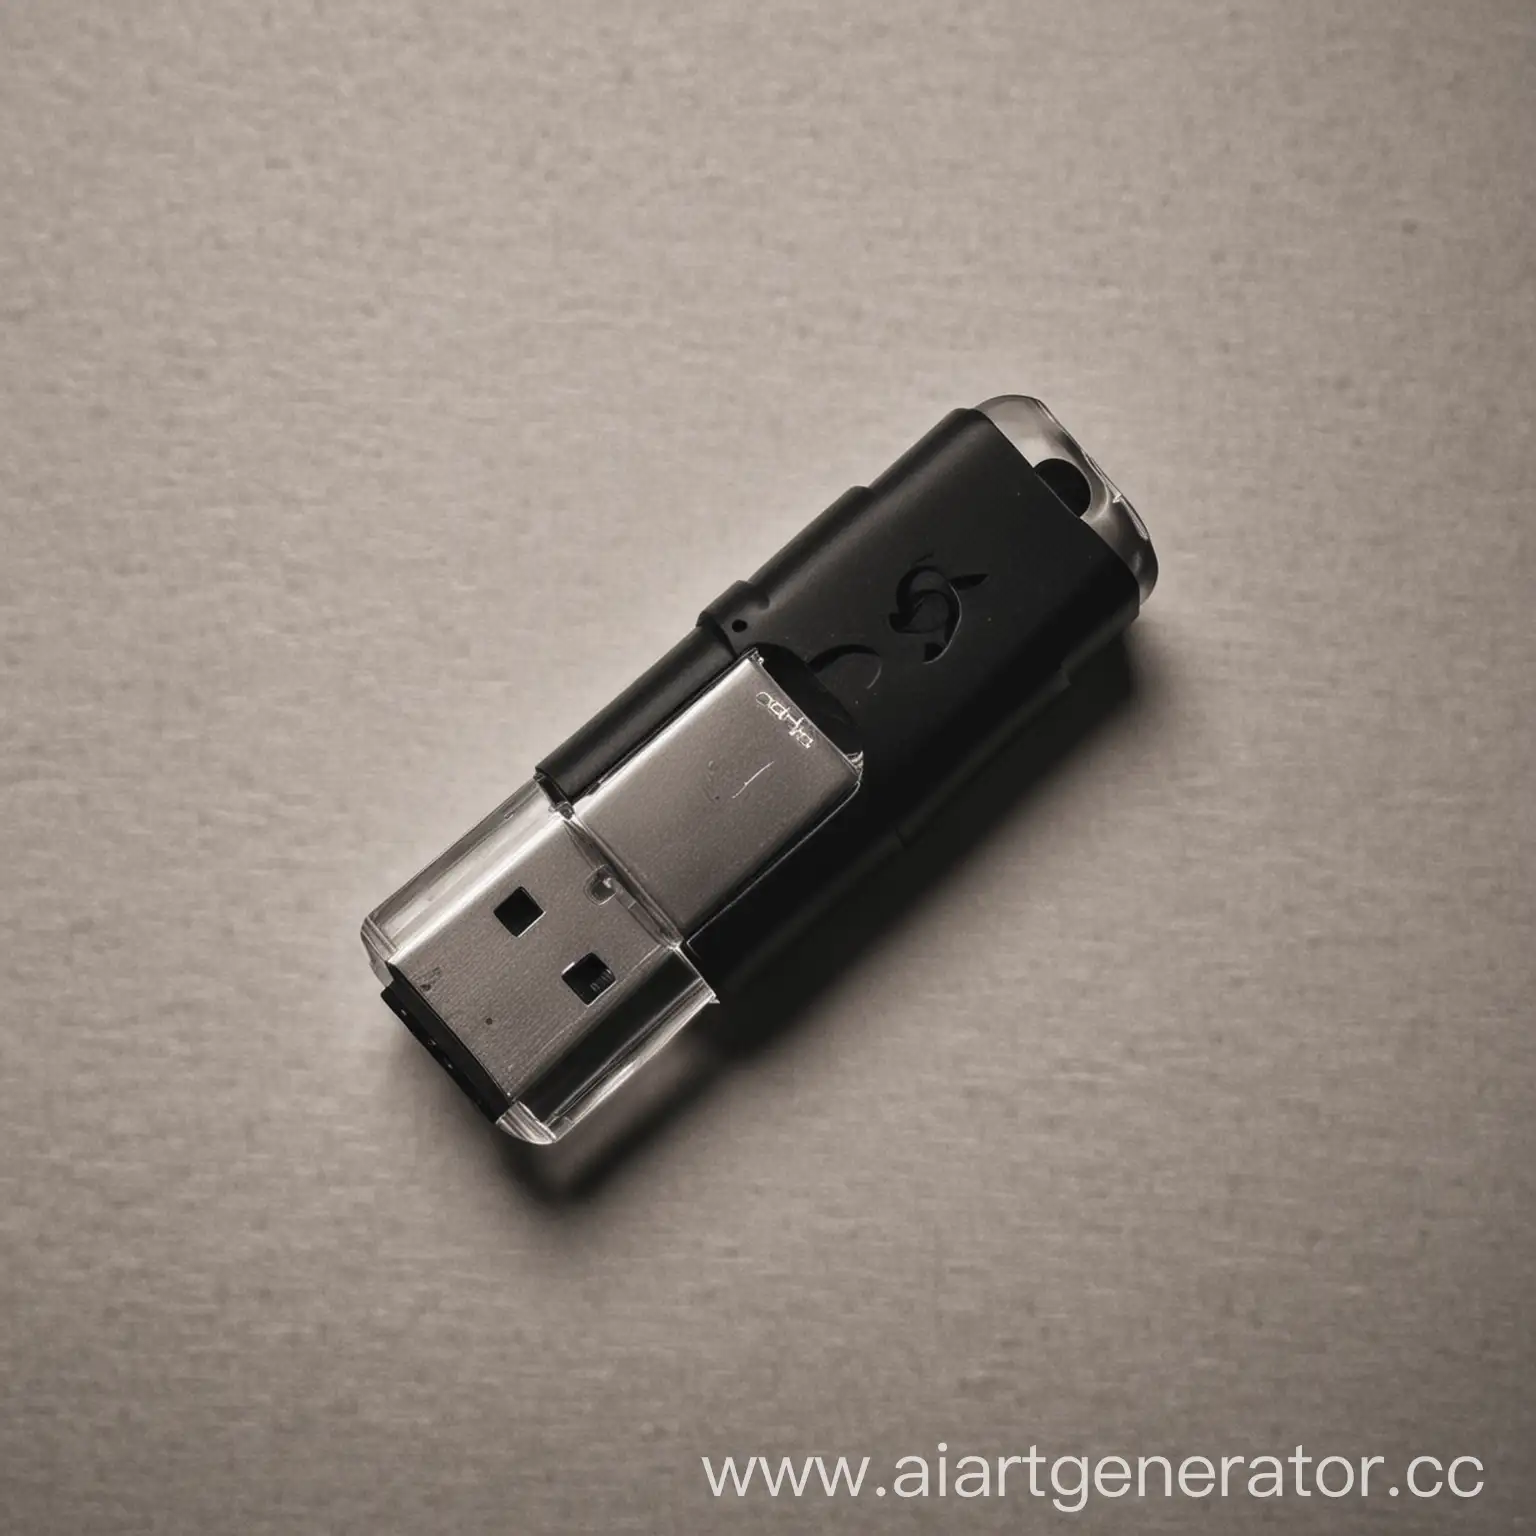 Flash-Drive-Cover-Art-Digital-Storage-Concept-with-Vibrant-Colors